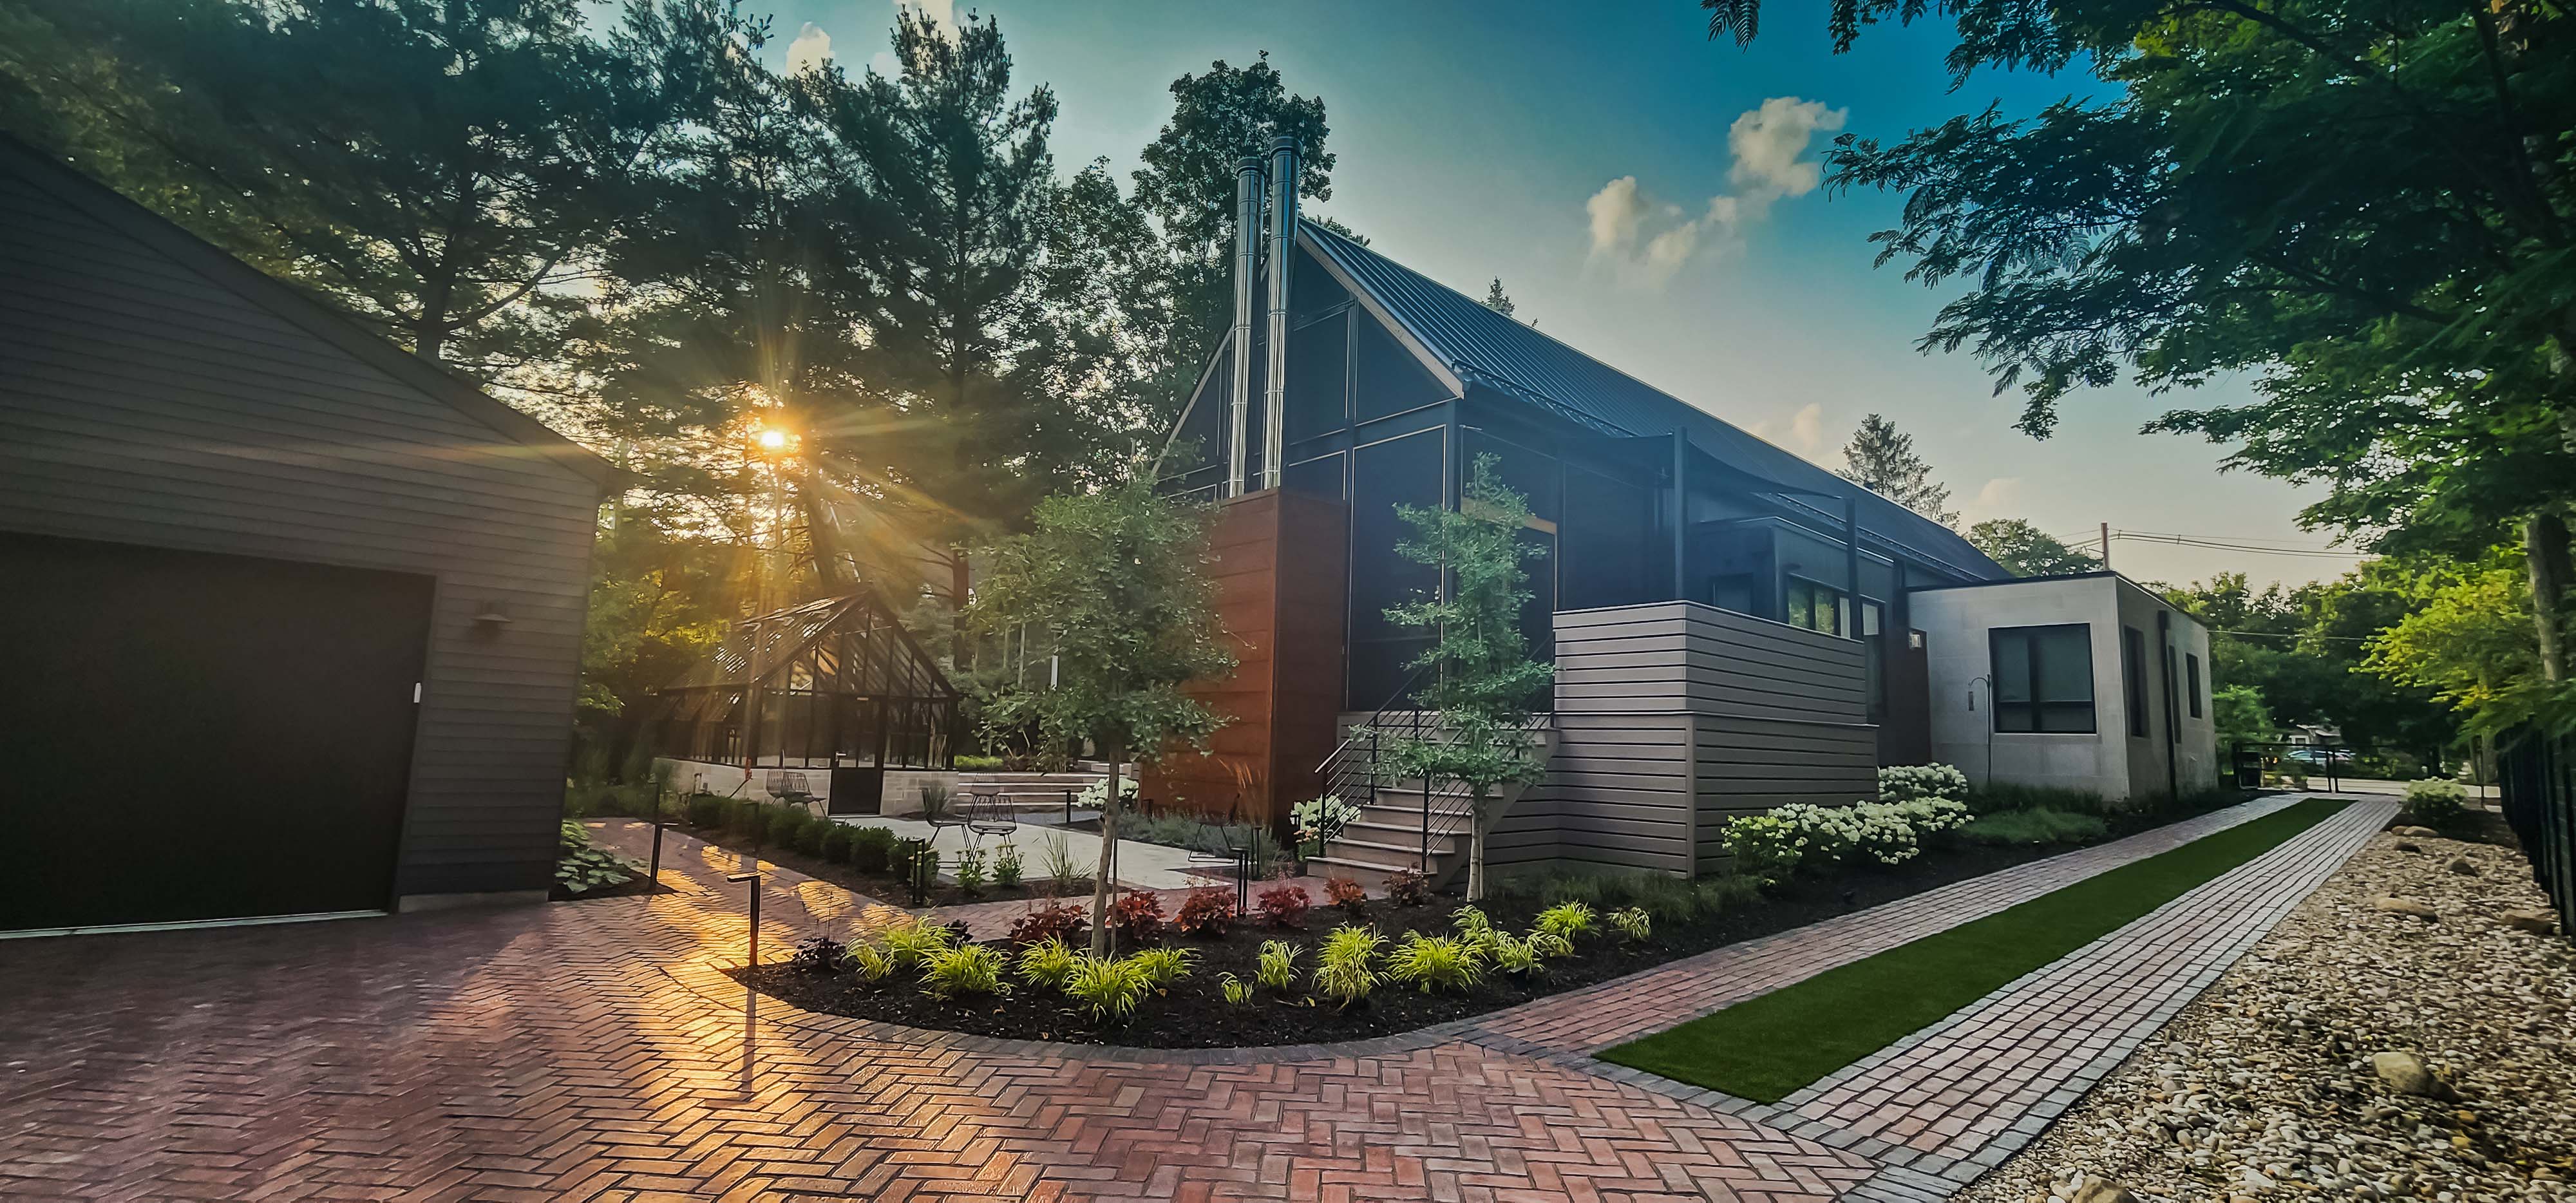 Brick Driveway and landscaping at modern house with greenhouse at  sunset